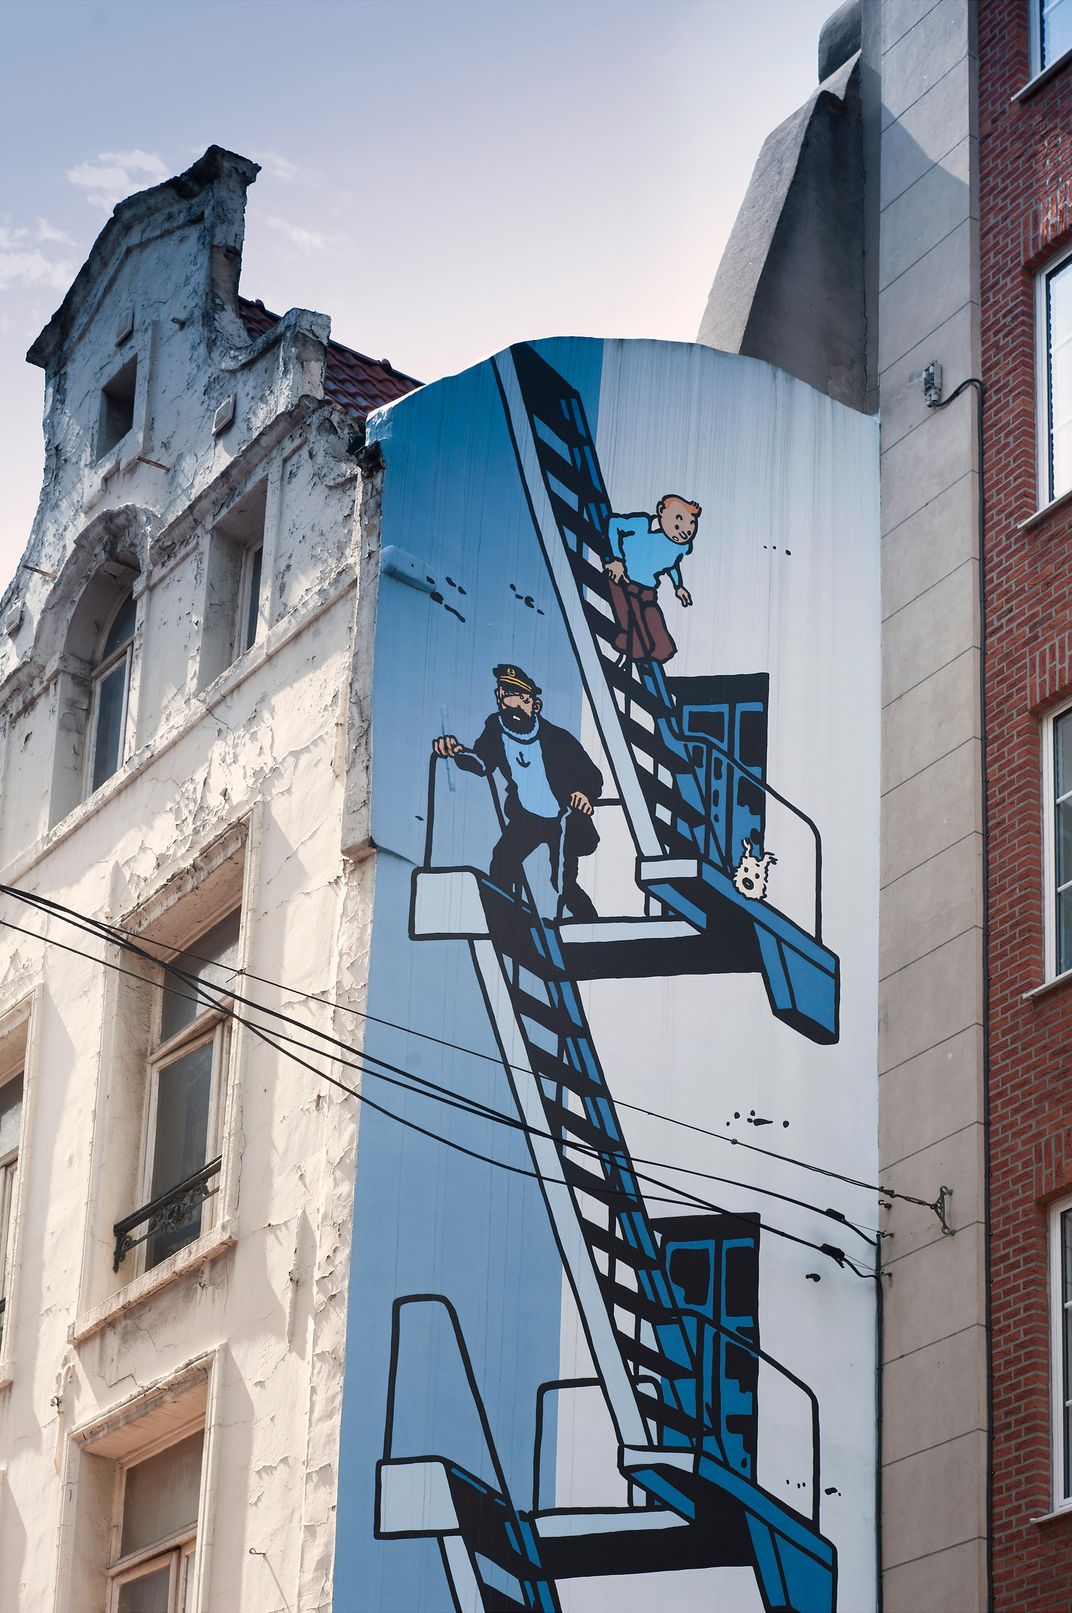 Mural of Hergé's Tintin and Captain Haddock, Brussels